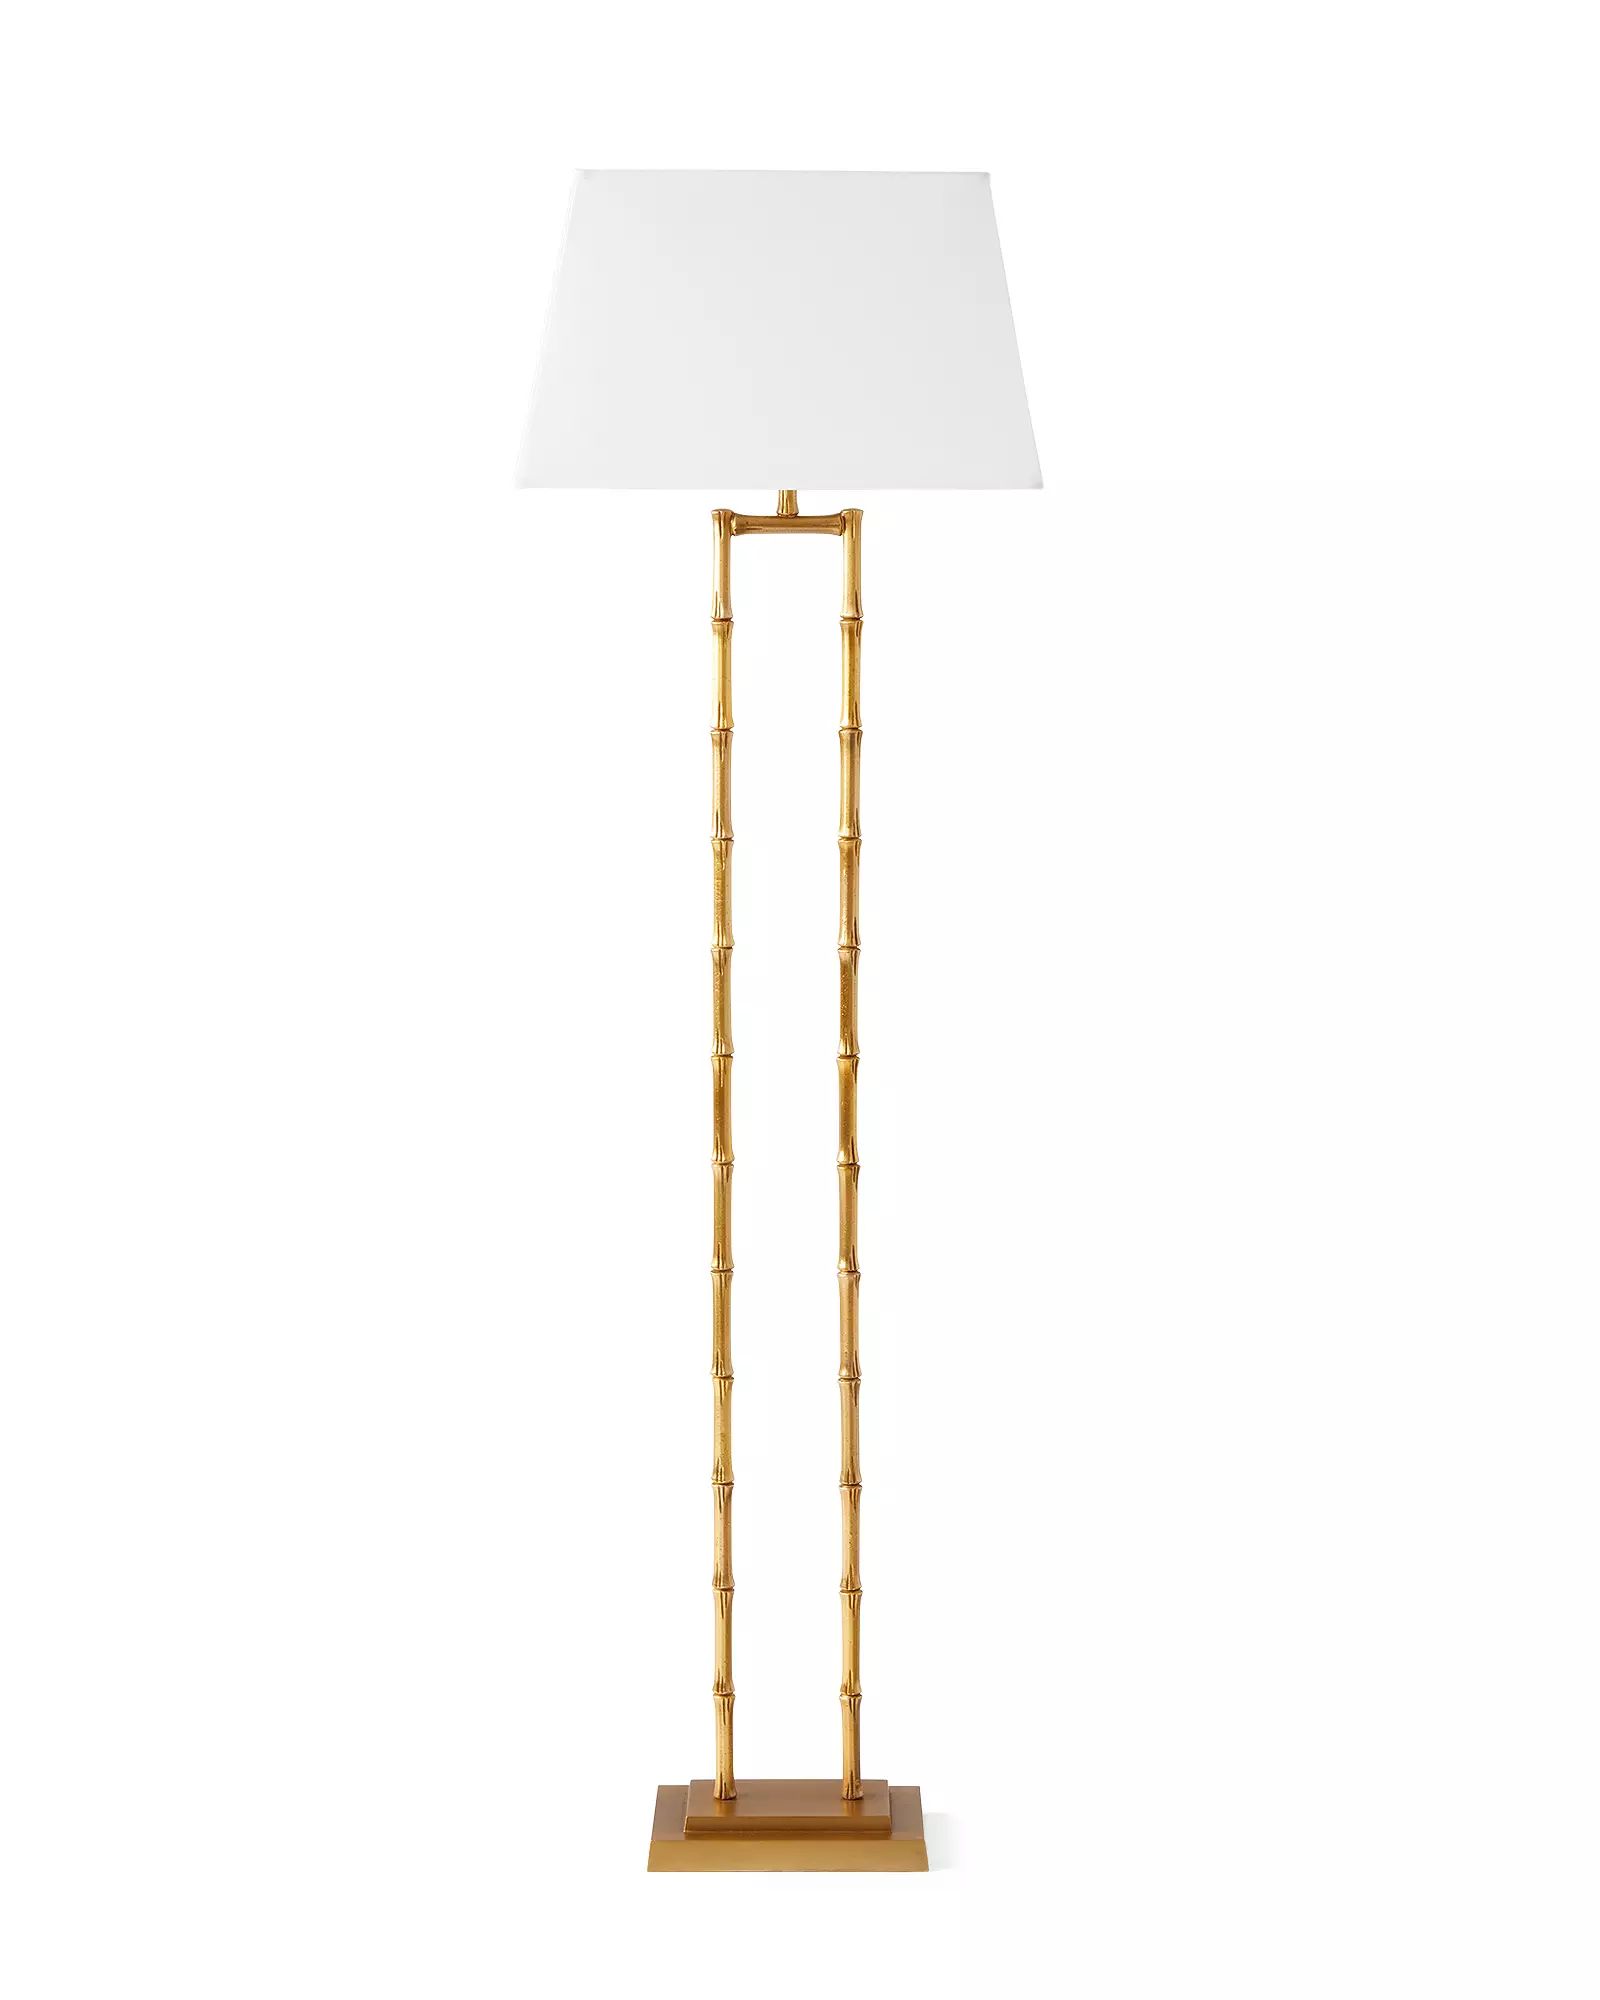 Lyford Floor Lamp | Serena and Lily